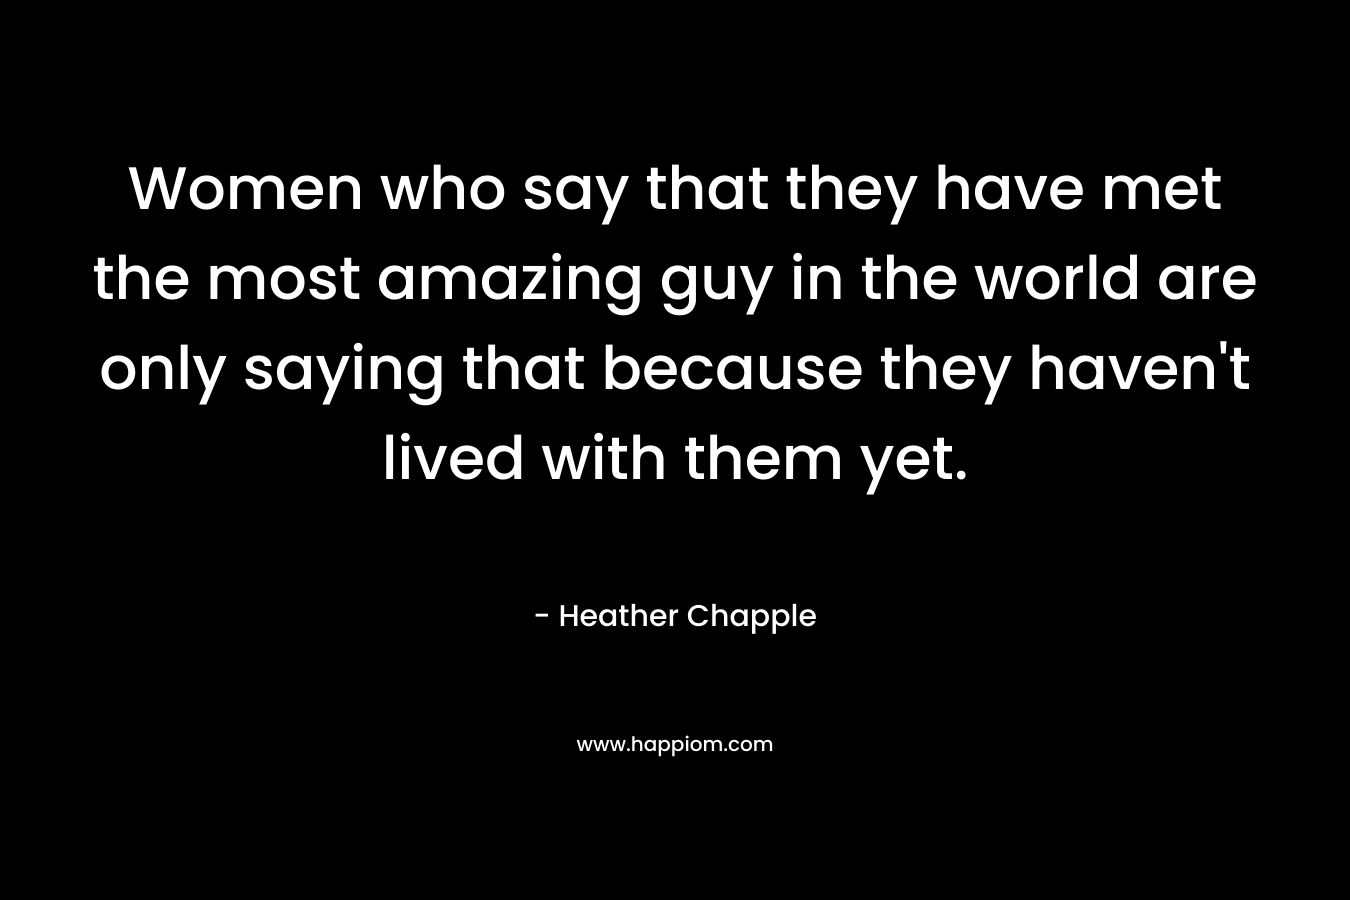 Women who say that they have met the most amazing guy in the world are only saying that because they haven’t lived with them yet. – Heather Chapple